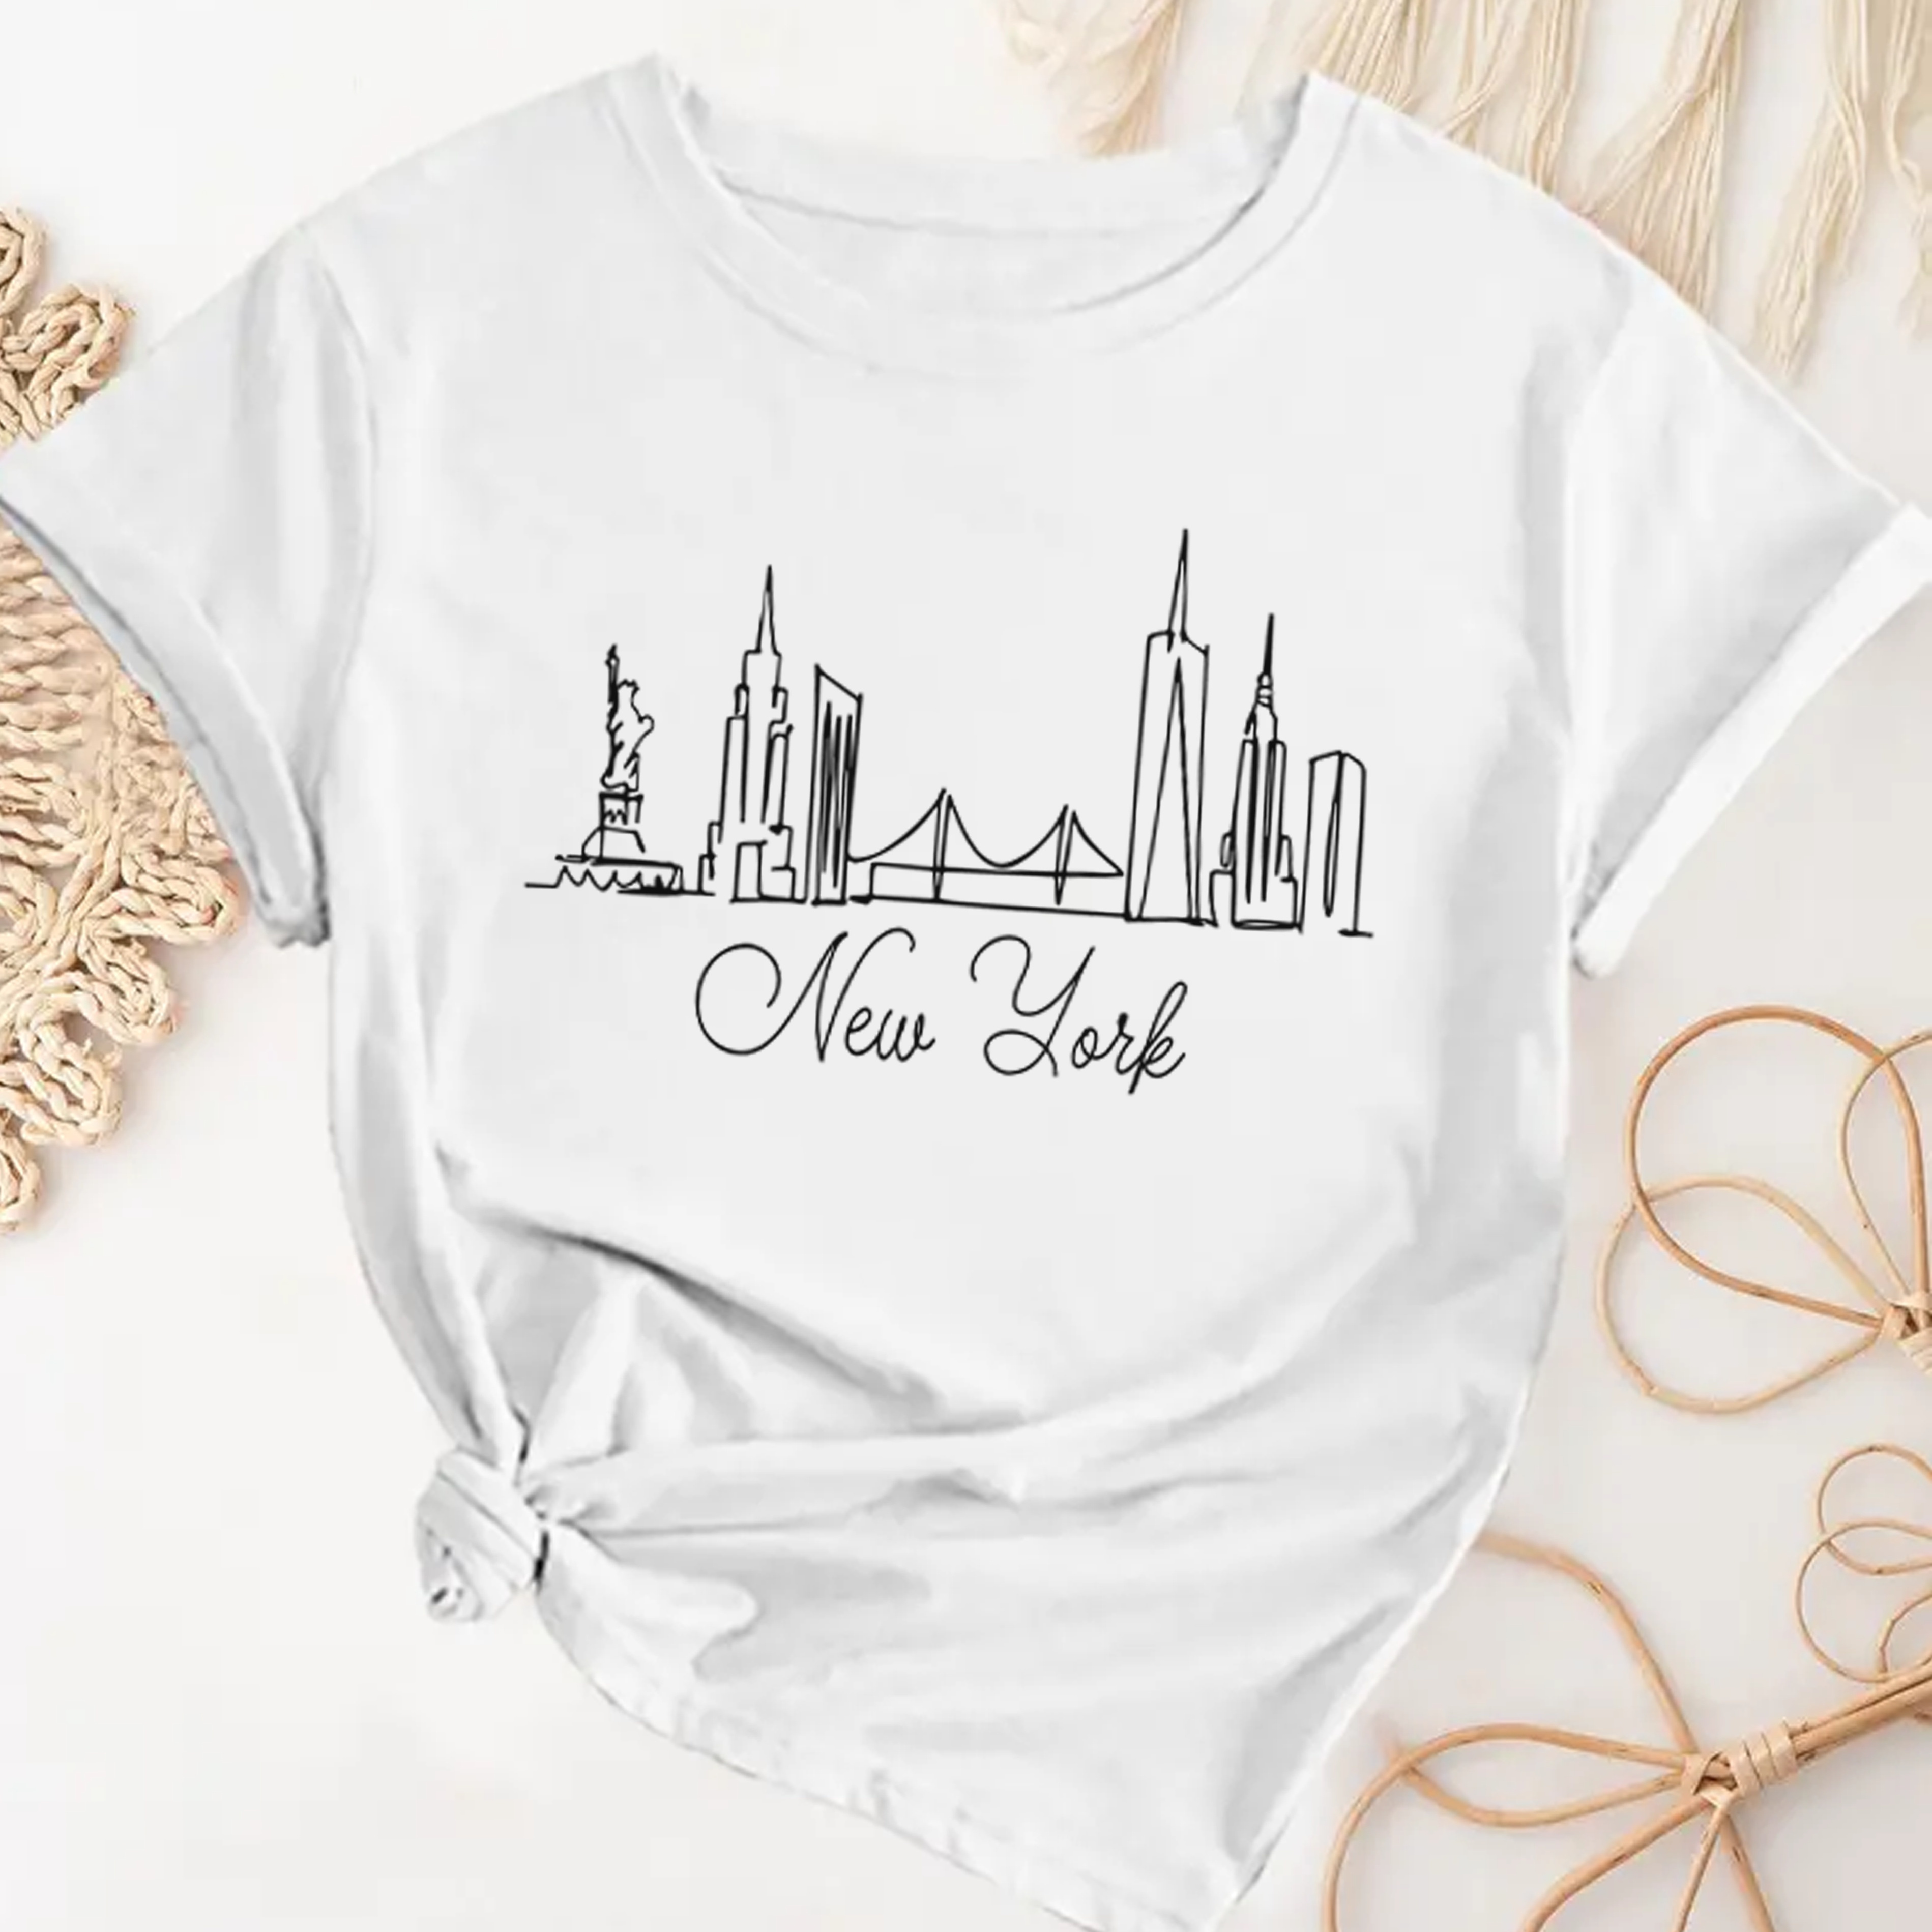 

New York Print T-shirt, Casual Crew Neck Short Sleeve Top For Spring & Summer, Women's Clothing